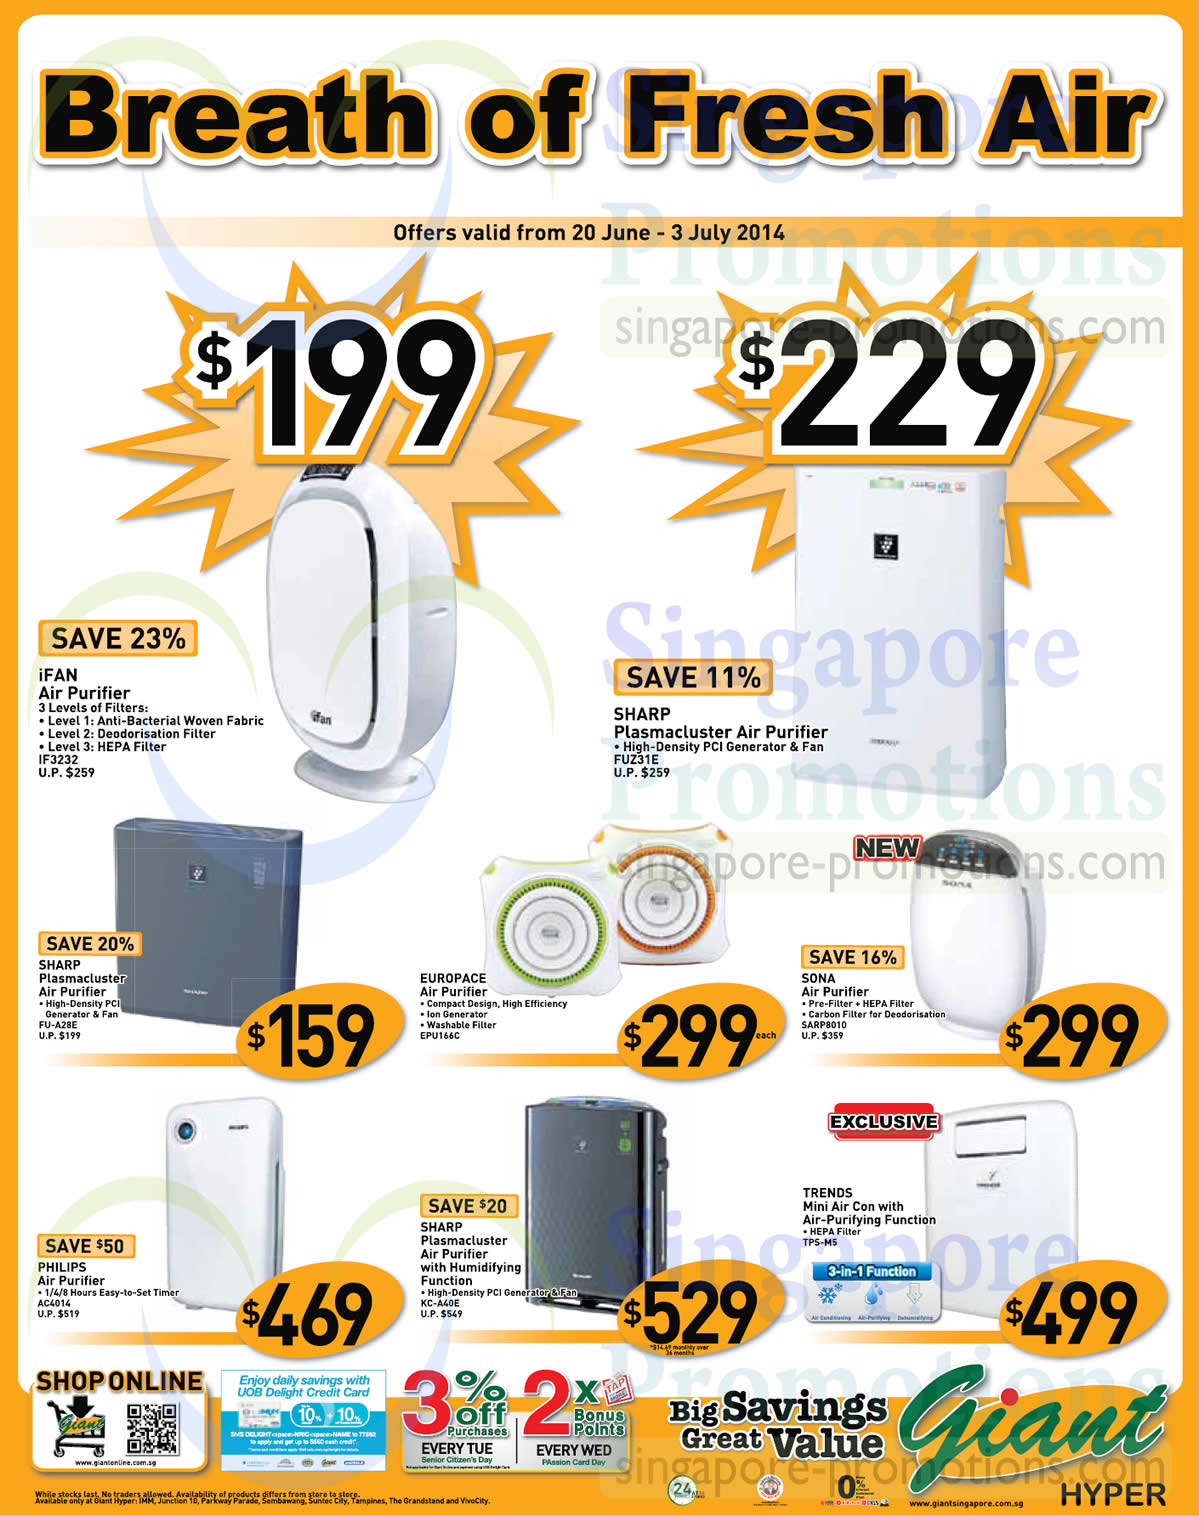 Featured image for Giant Hypermarket Cooling Appliances Offers 20 Jun - 3 Jul 2014